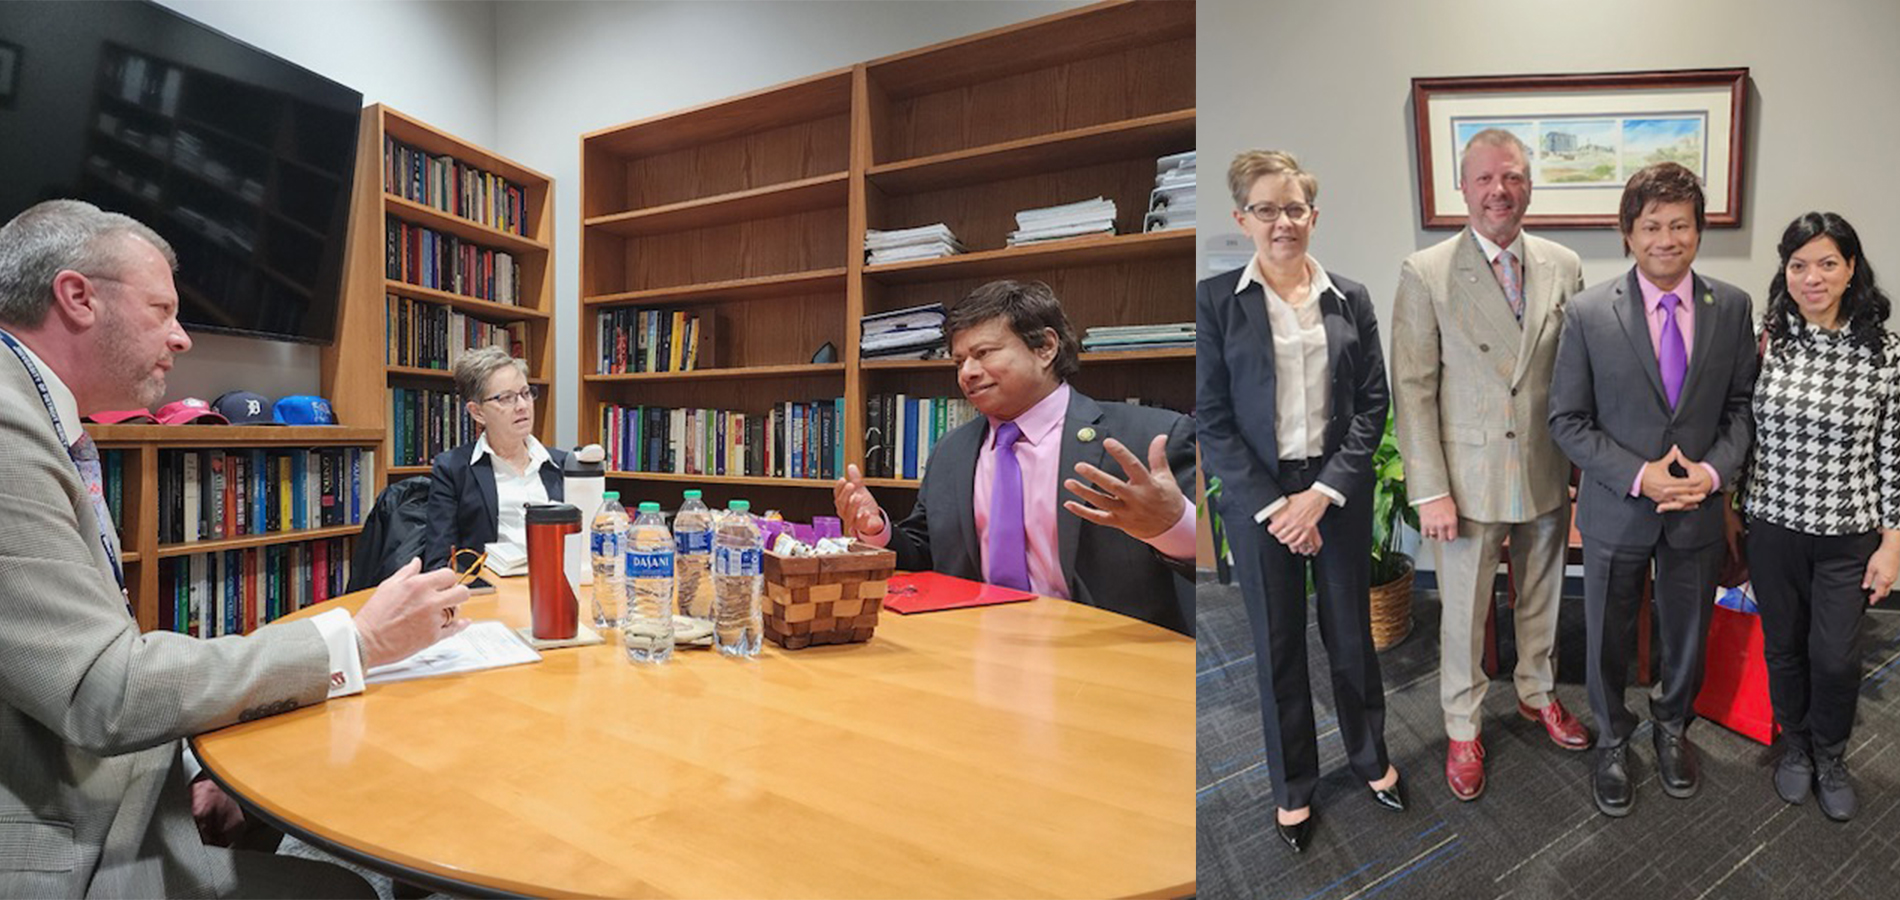 Donald B. Taylor and Ann Serra meet with U.S. Congressman Shri Thanedar (left photo) while they pose with Thanedar and his wife for a photo (right)